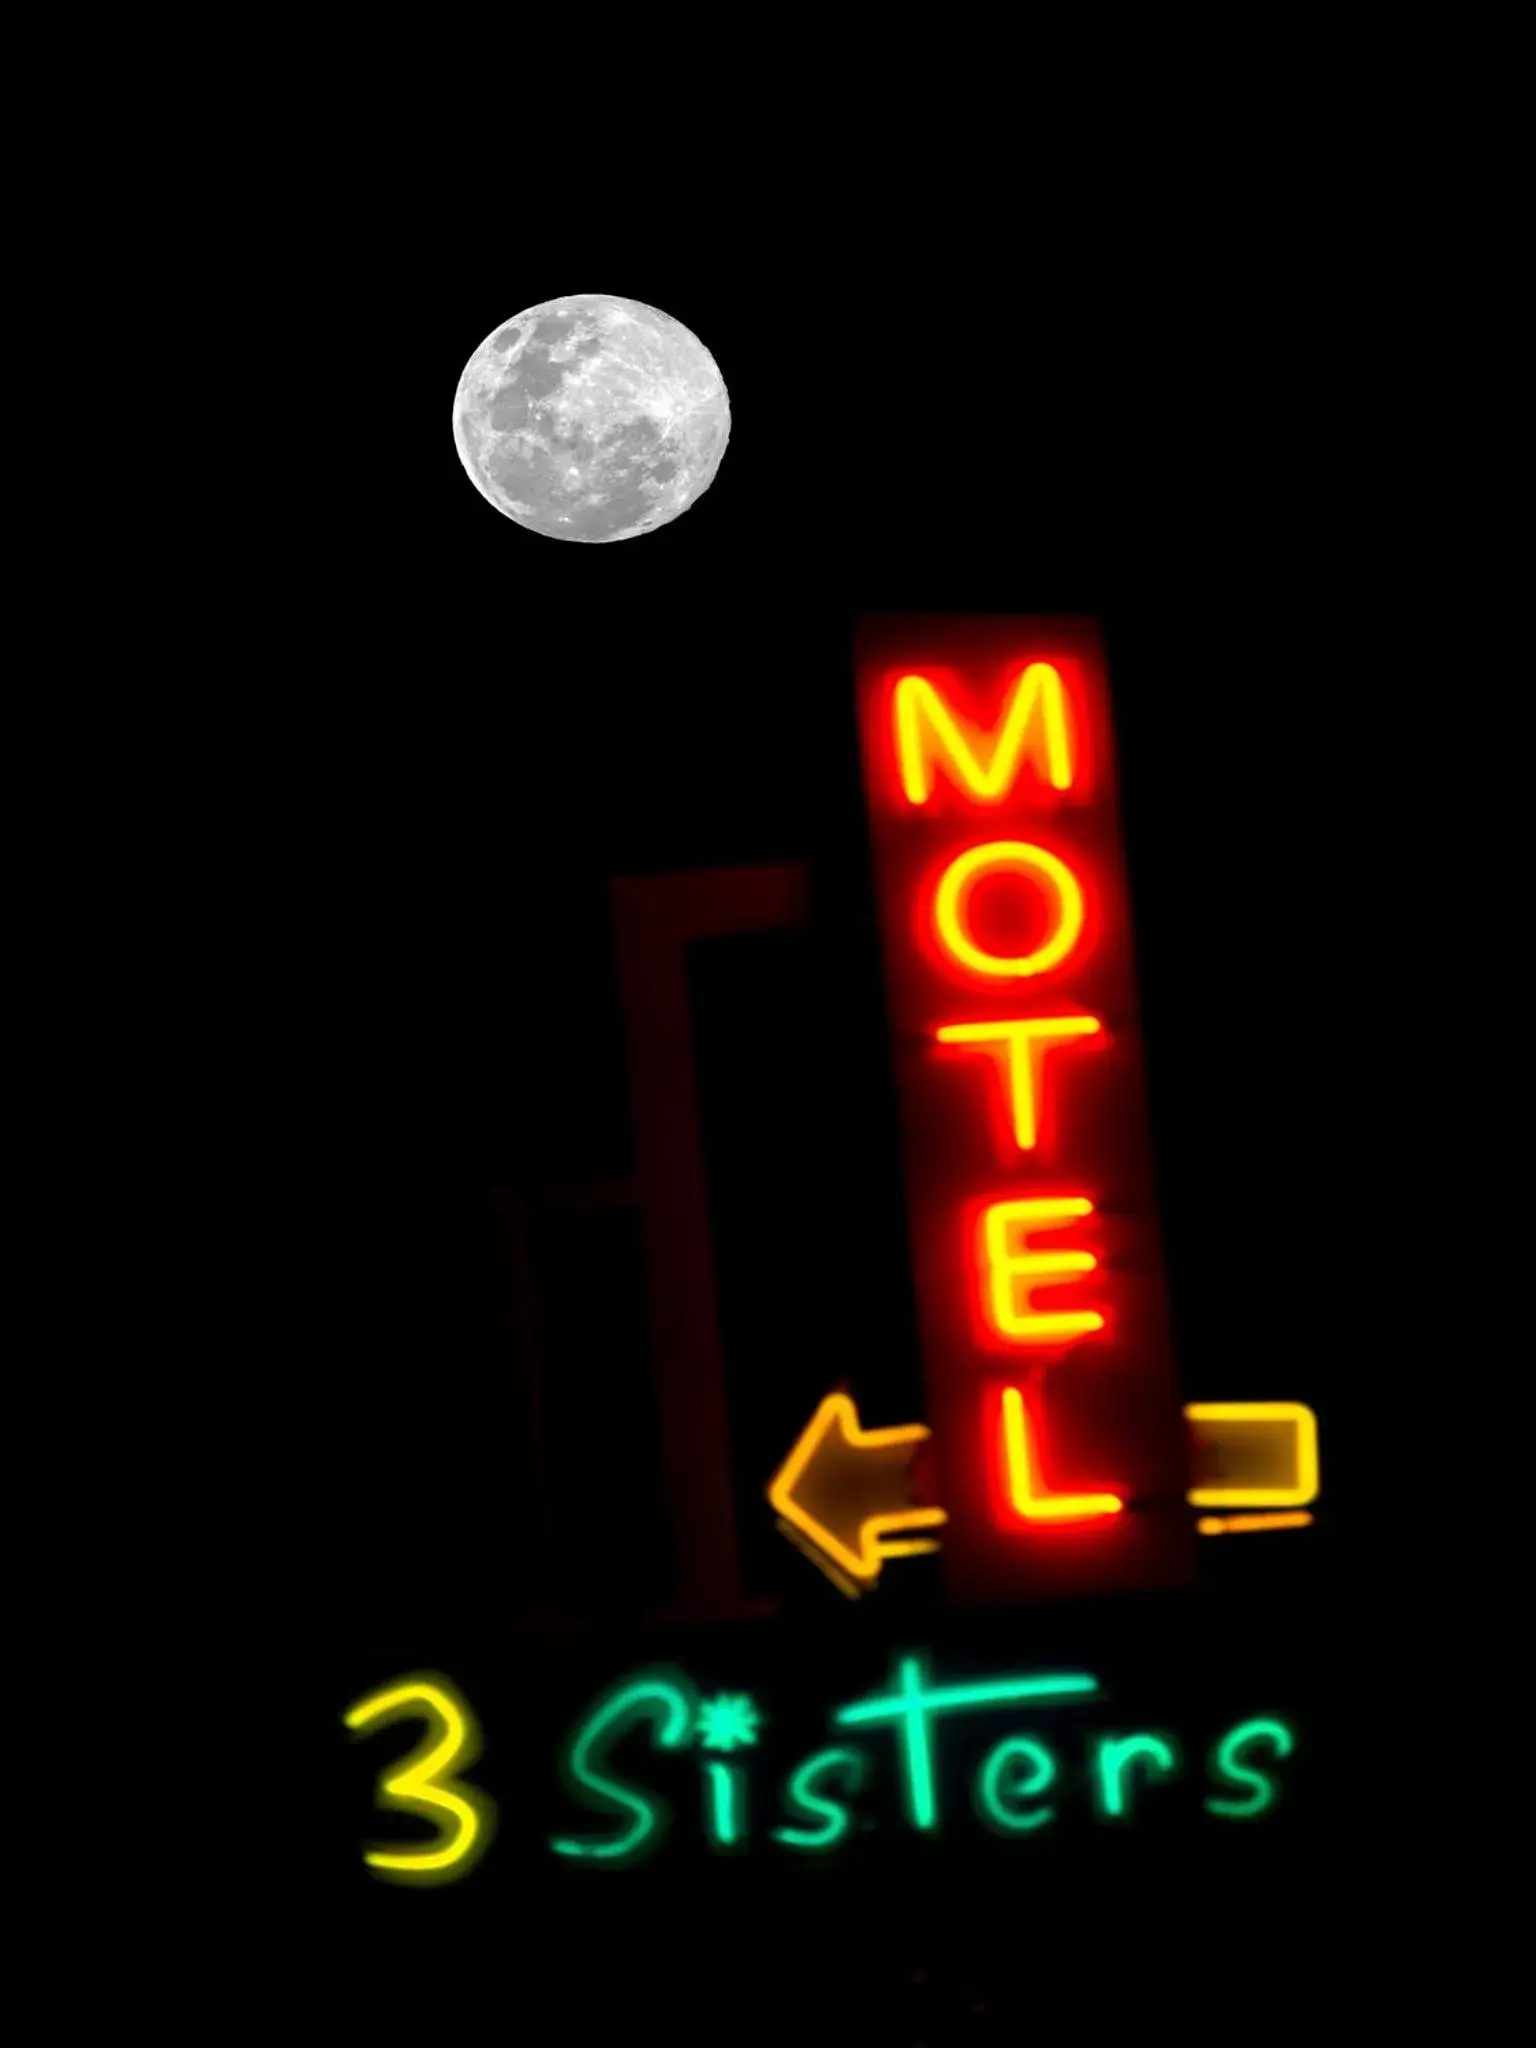 Property logo or sign, Logo/Certificate/Sign/Award in 3 Sisters Motel